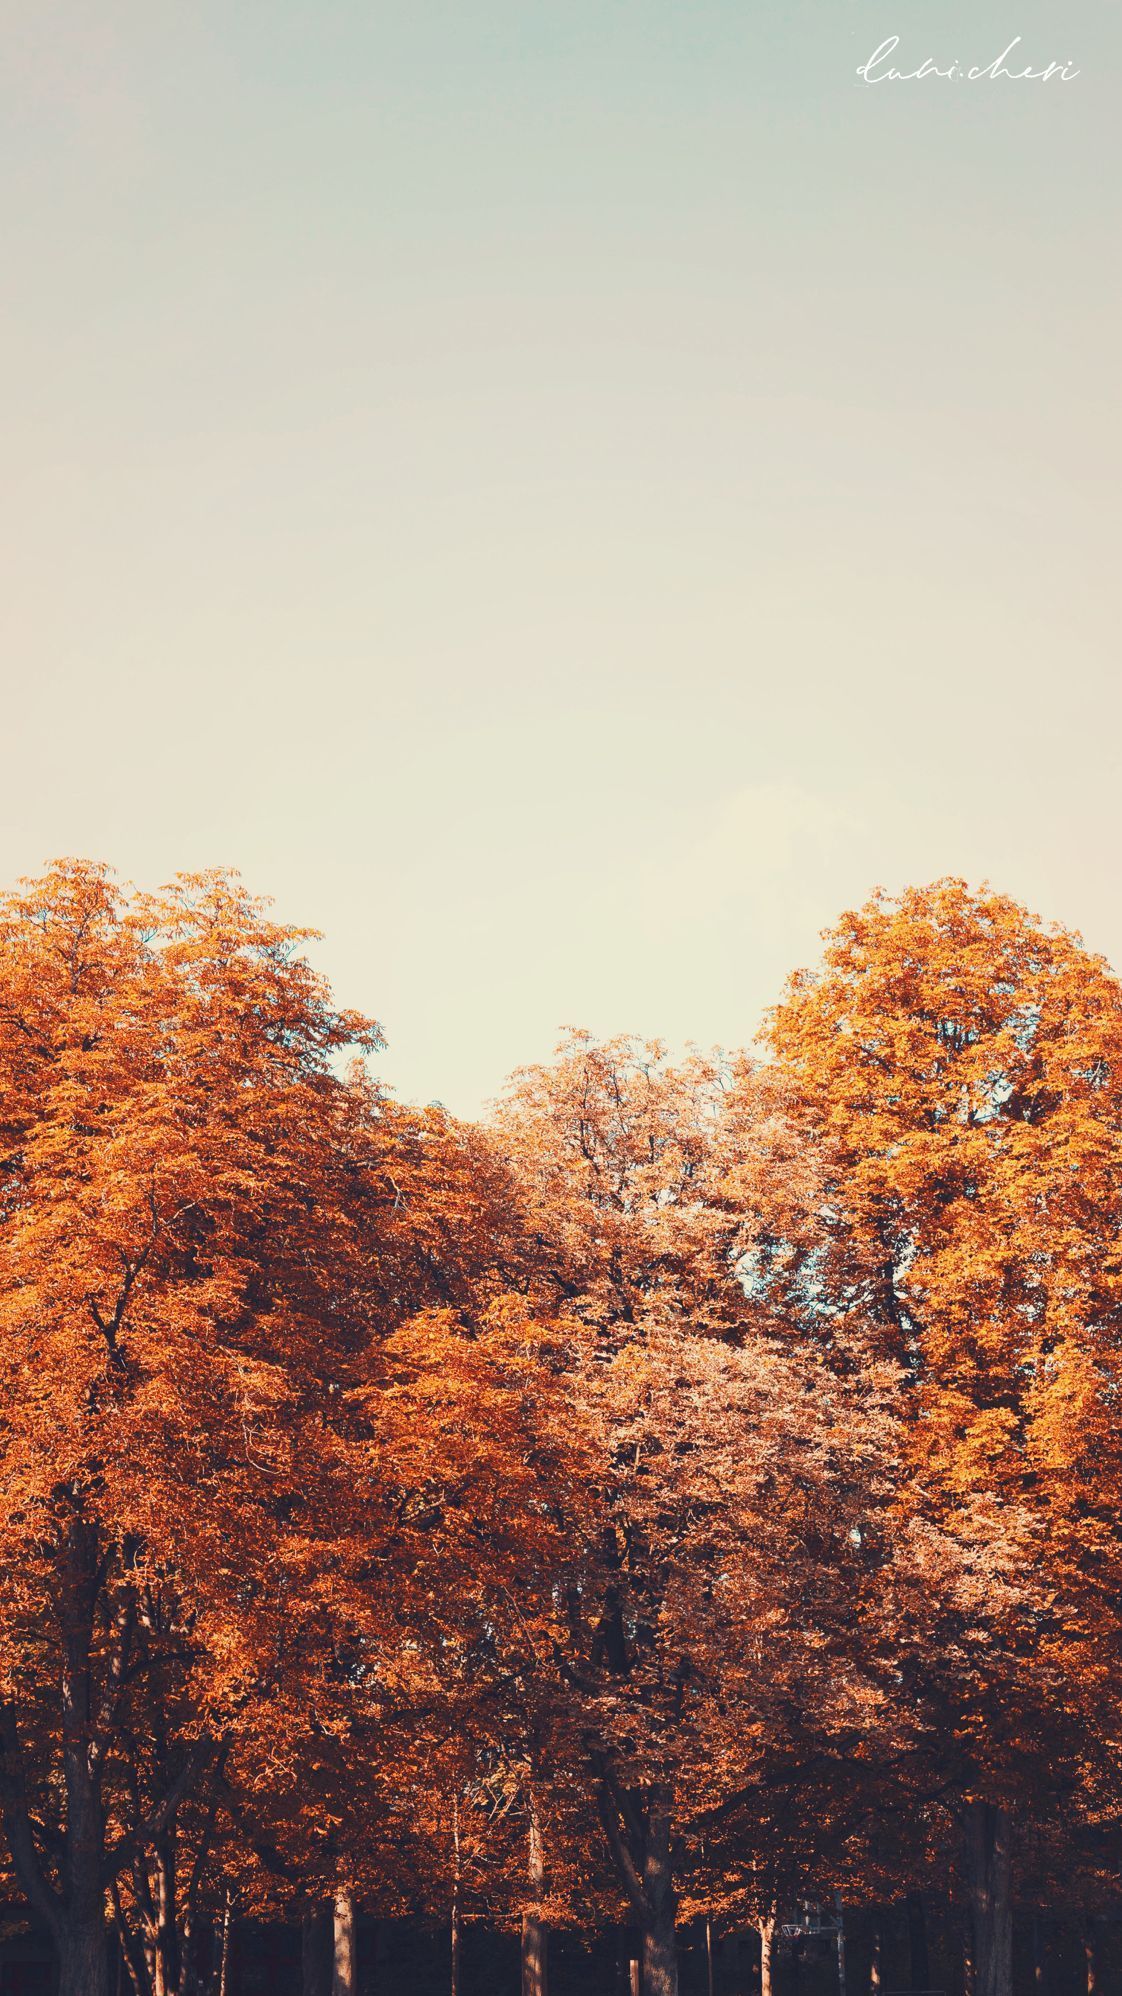 IPhone wallpaper of a row of trees with orange leaves. - Fall, fall iPhone